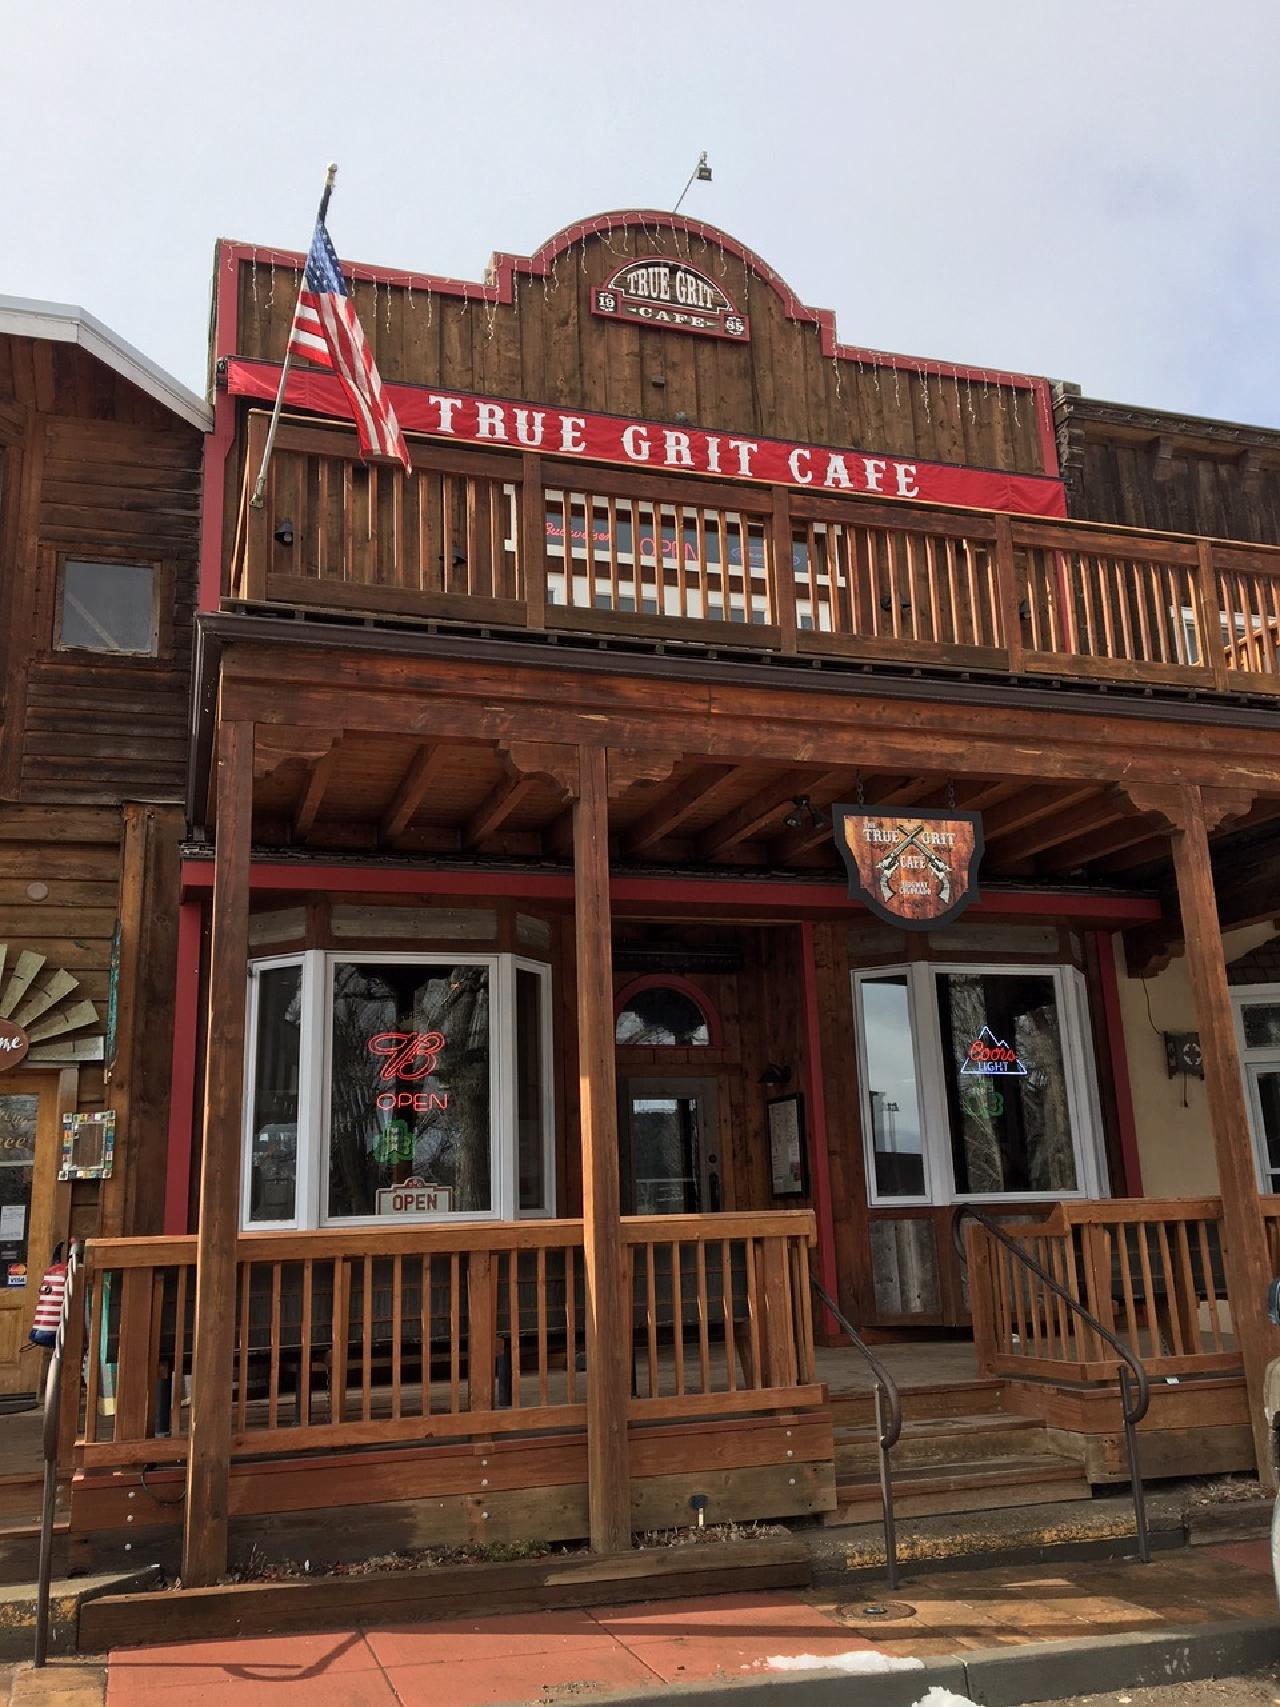 True Grit Cafe (or “The Grit” to locals) in Ridgway, Colorado. Photo courtesy of Alissa Crandall.